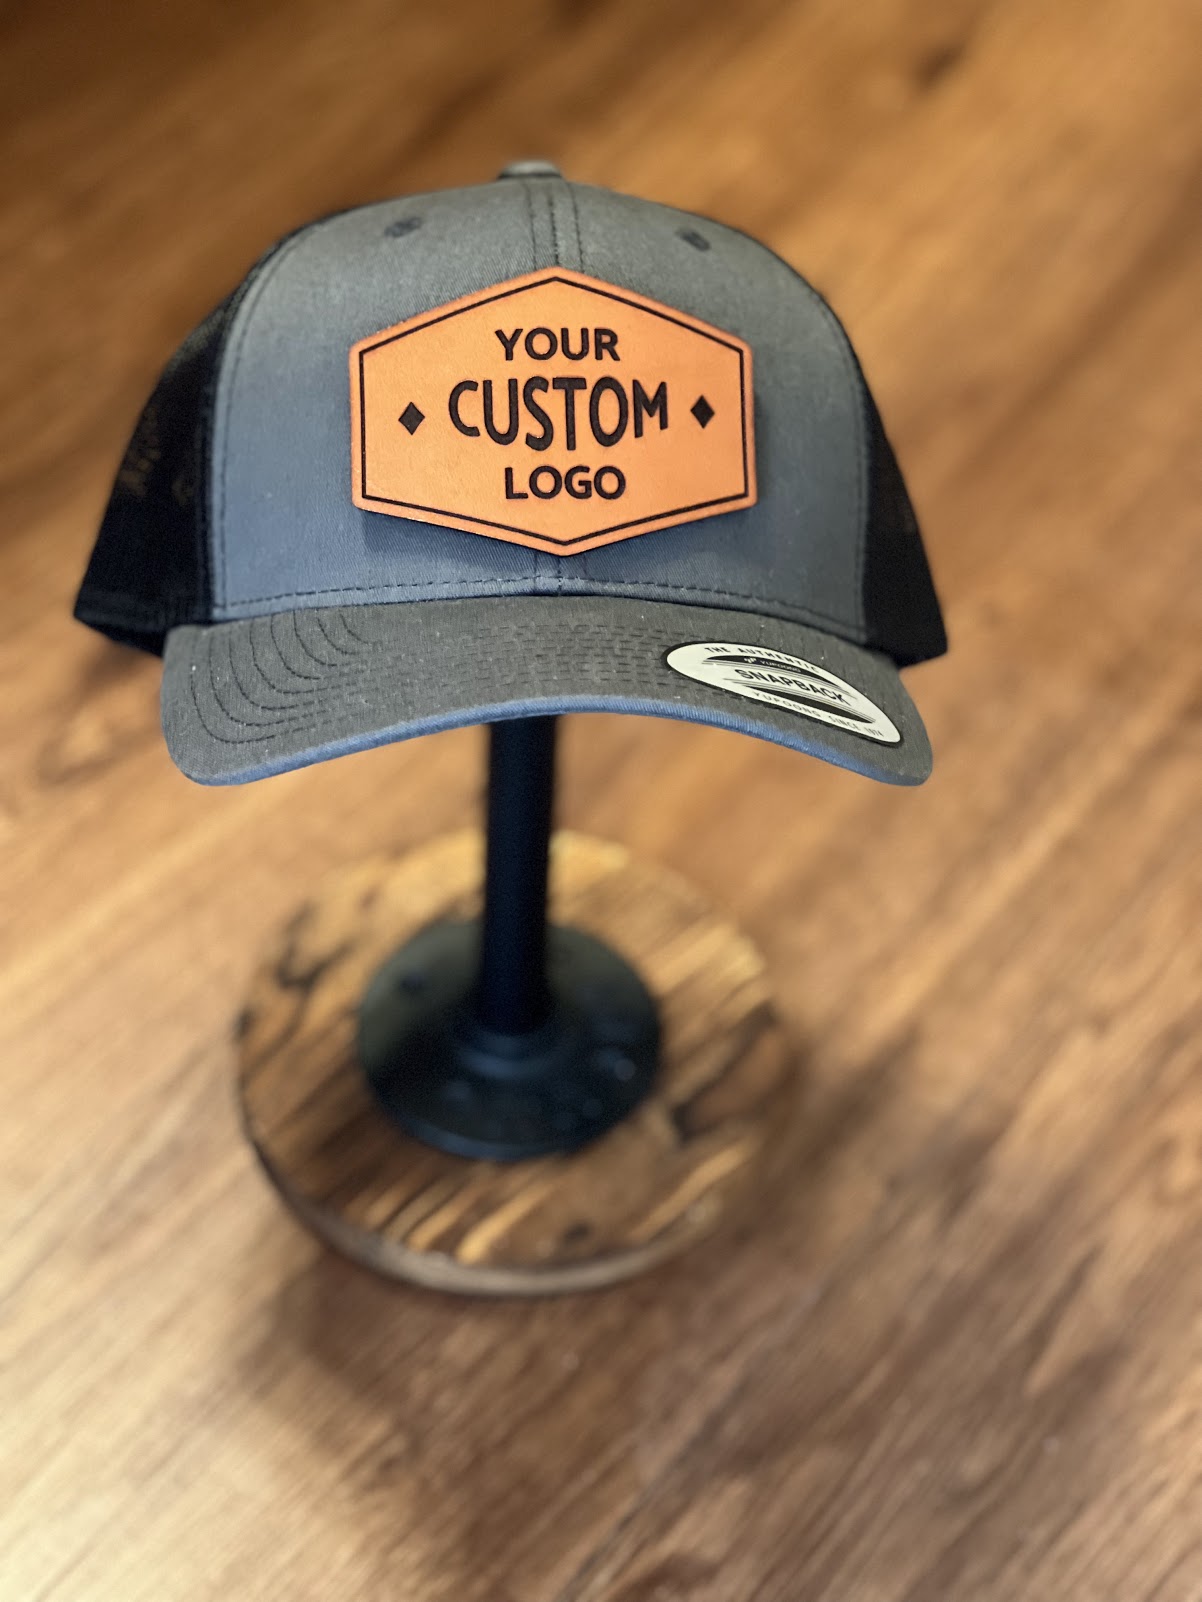 10 Creative Hat Design Ideas with Personalized Patches ⋆ Sienna Pacific